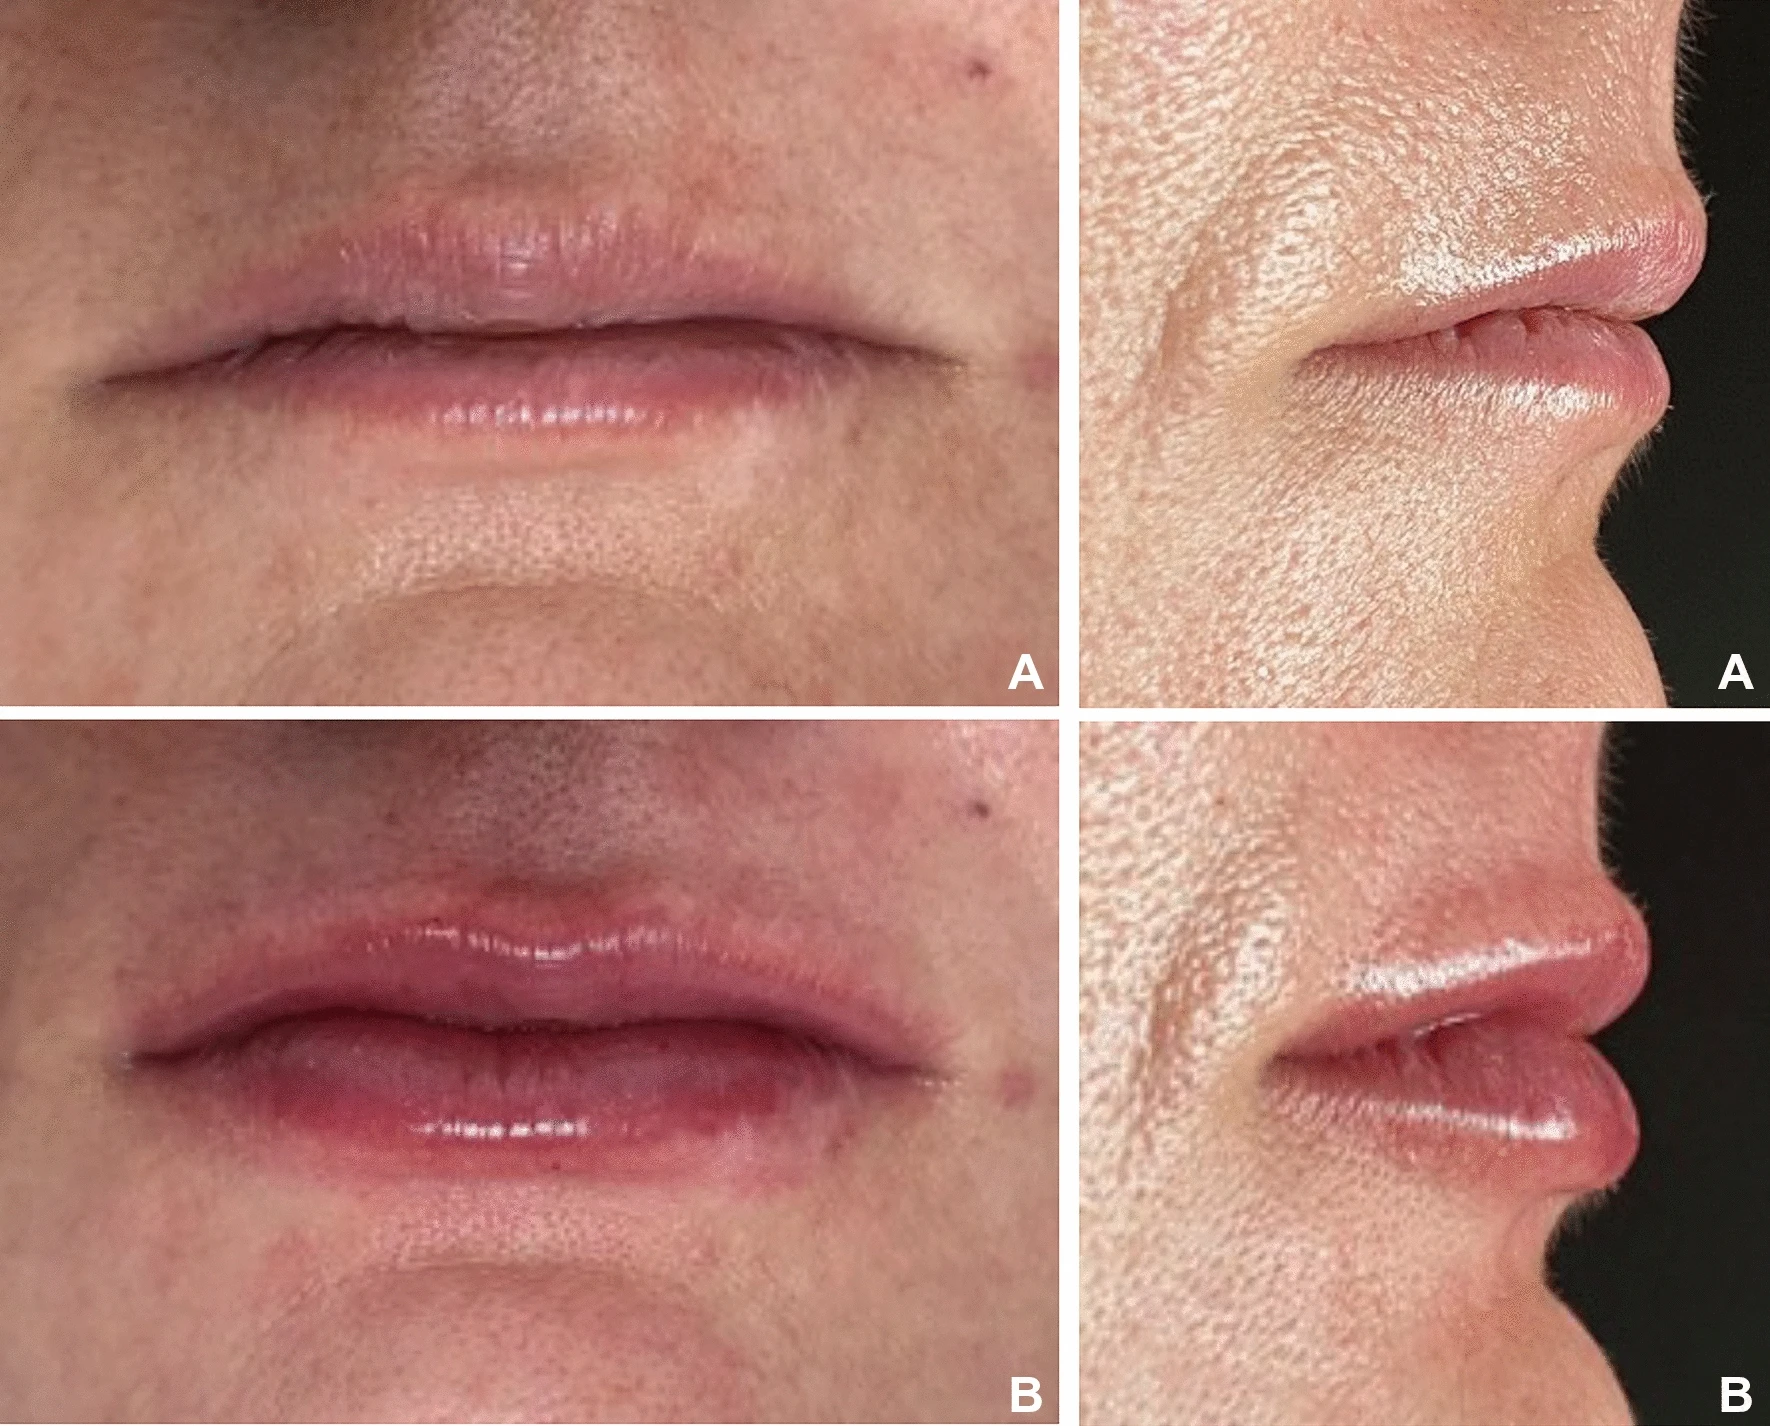 Patient from the group with thinner lips (a) before lip filling and (b) ten days after lip filling. (Image: De Queiroz Hernandez et al., licensed under CC BY 4.0)